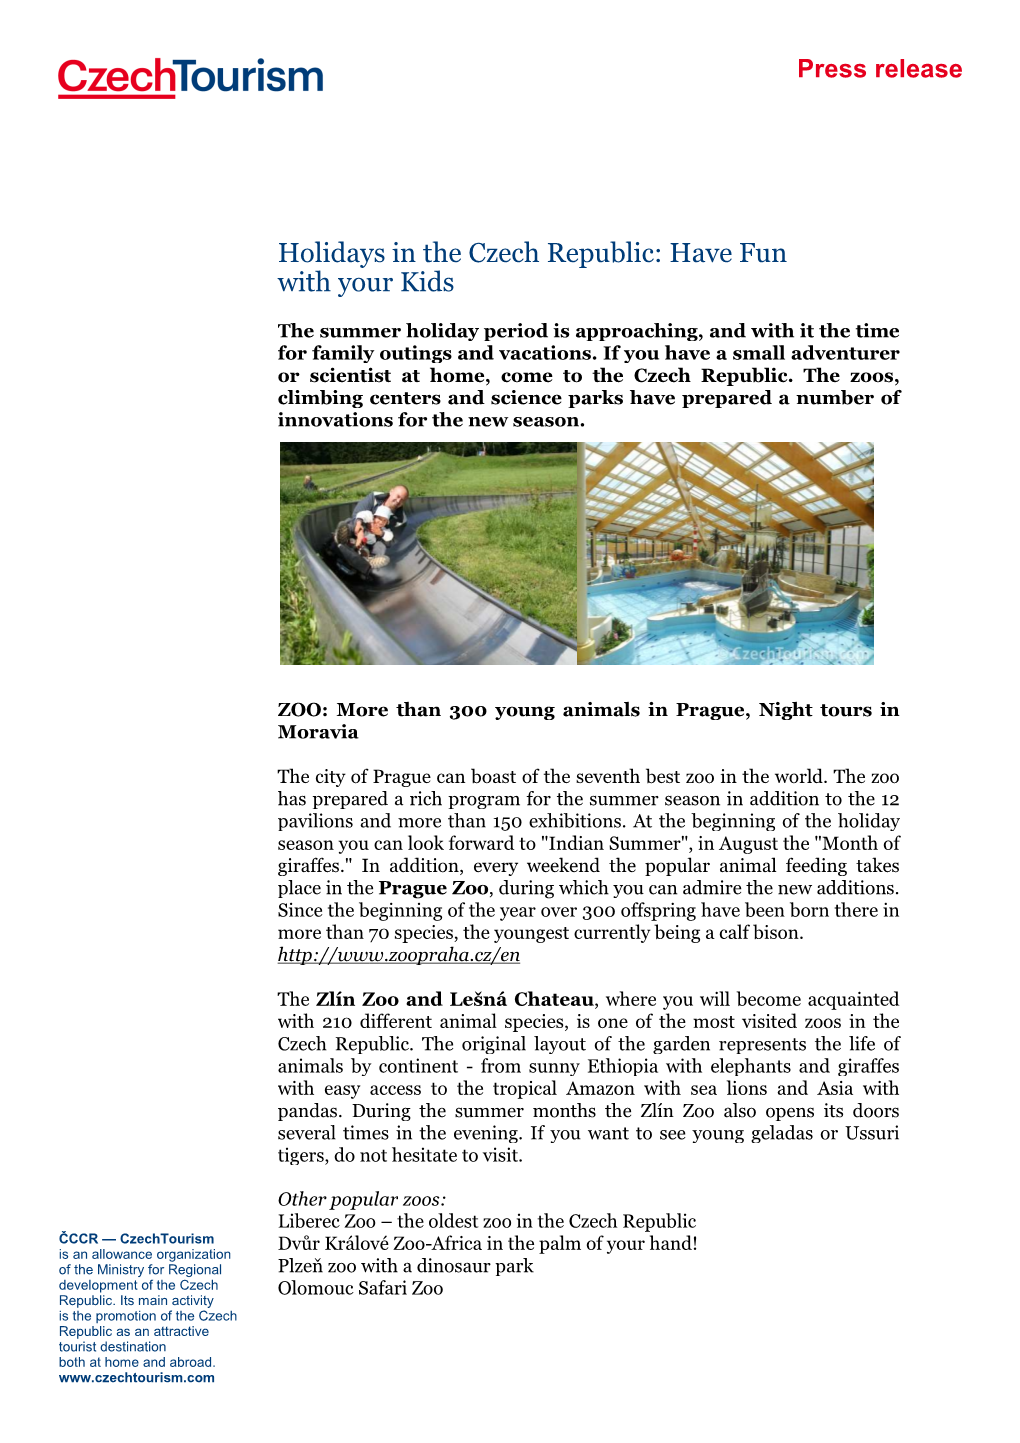 Holidays in the Czech Republic: Have Your Kids